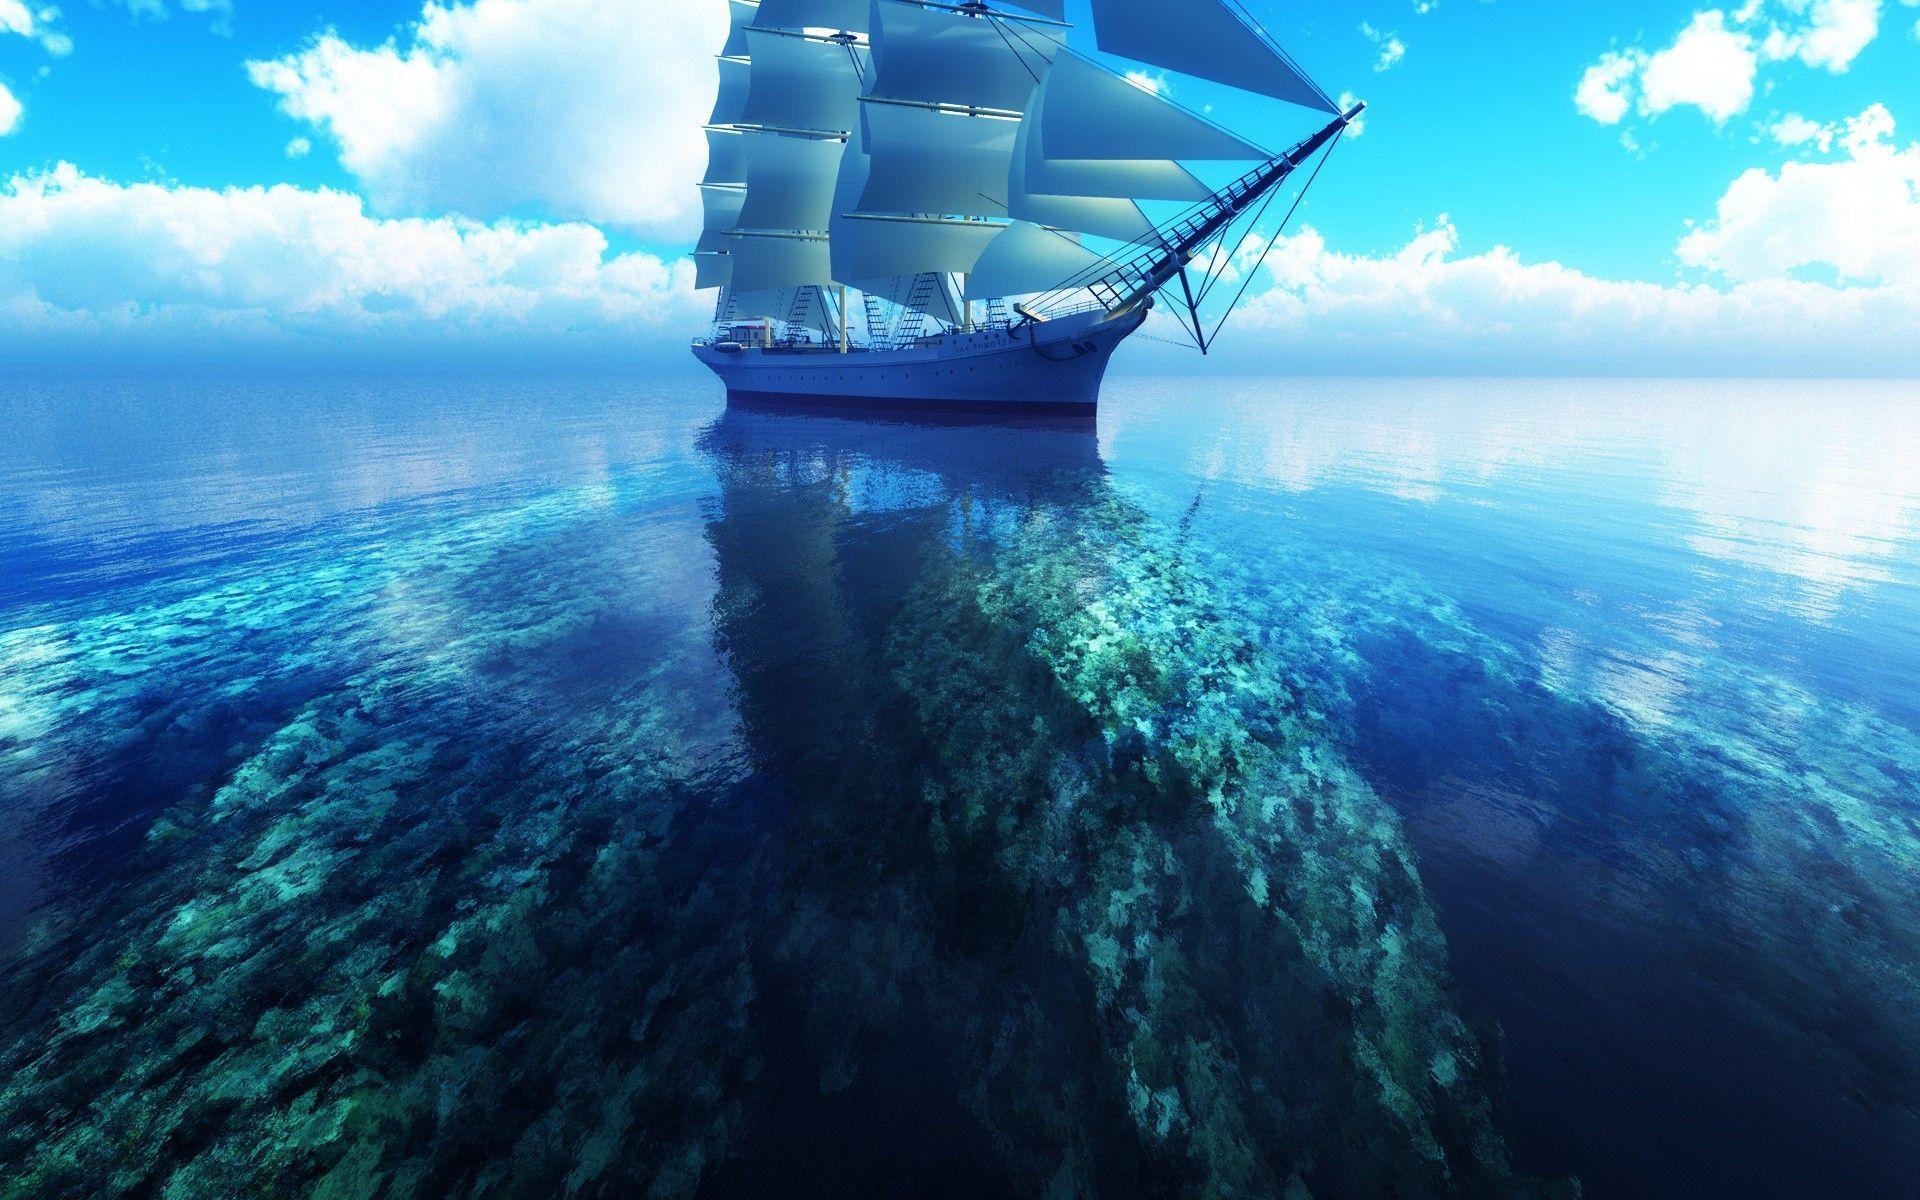 Clouds sea ships digital art skyscapes coral reef wallpaper